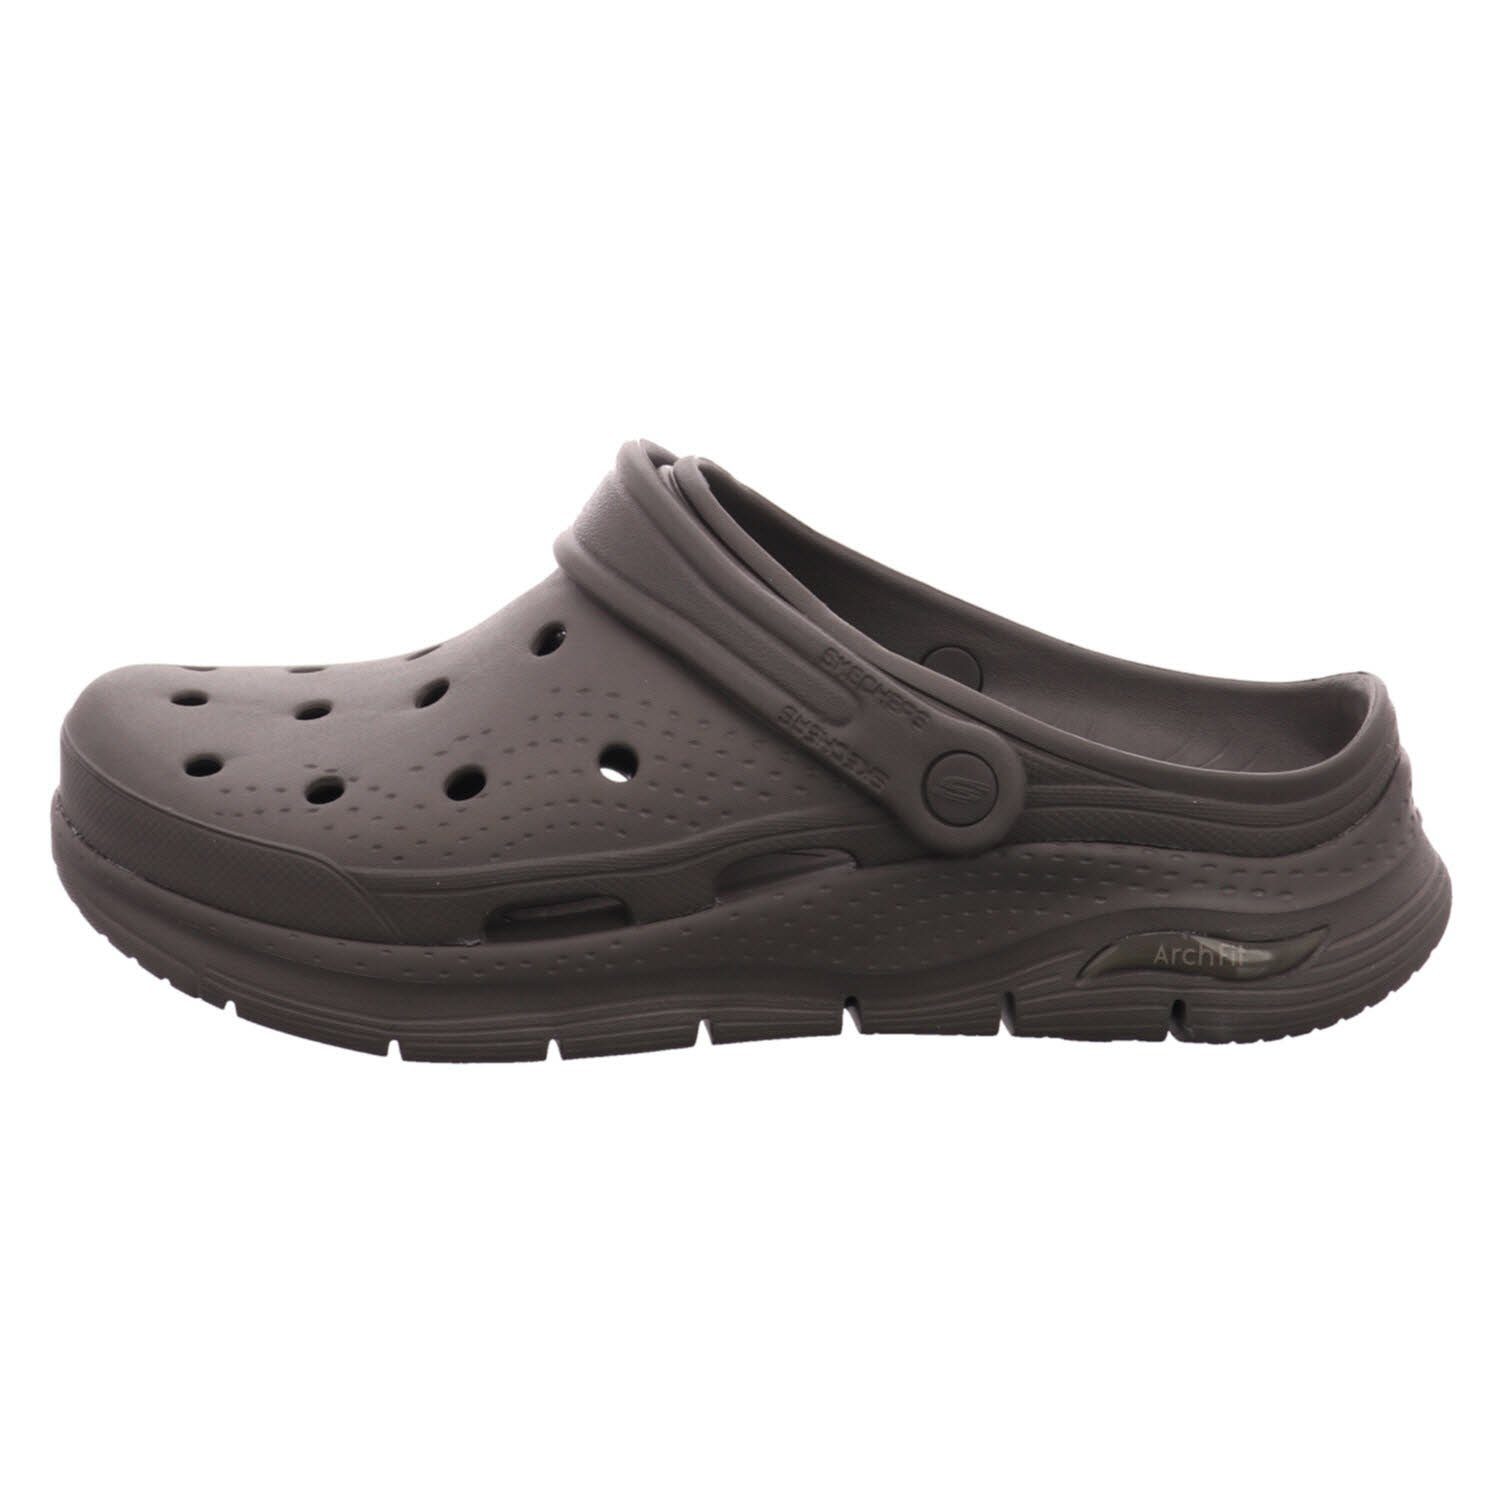 Skechers Solid Clog W/ Perf Detail And Outdoorschuh